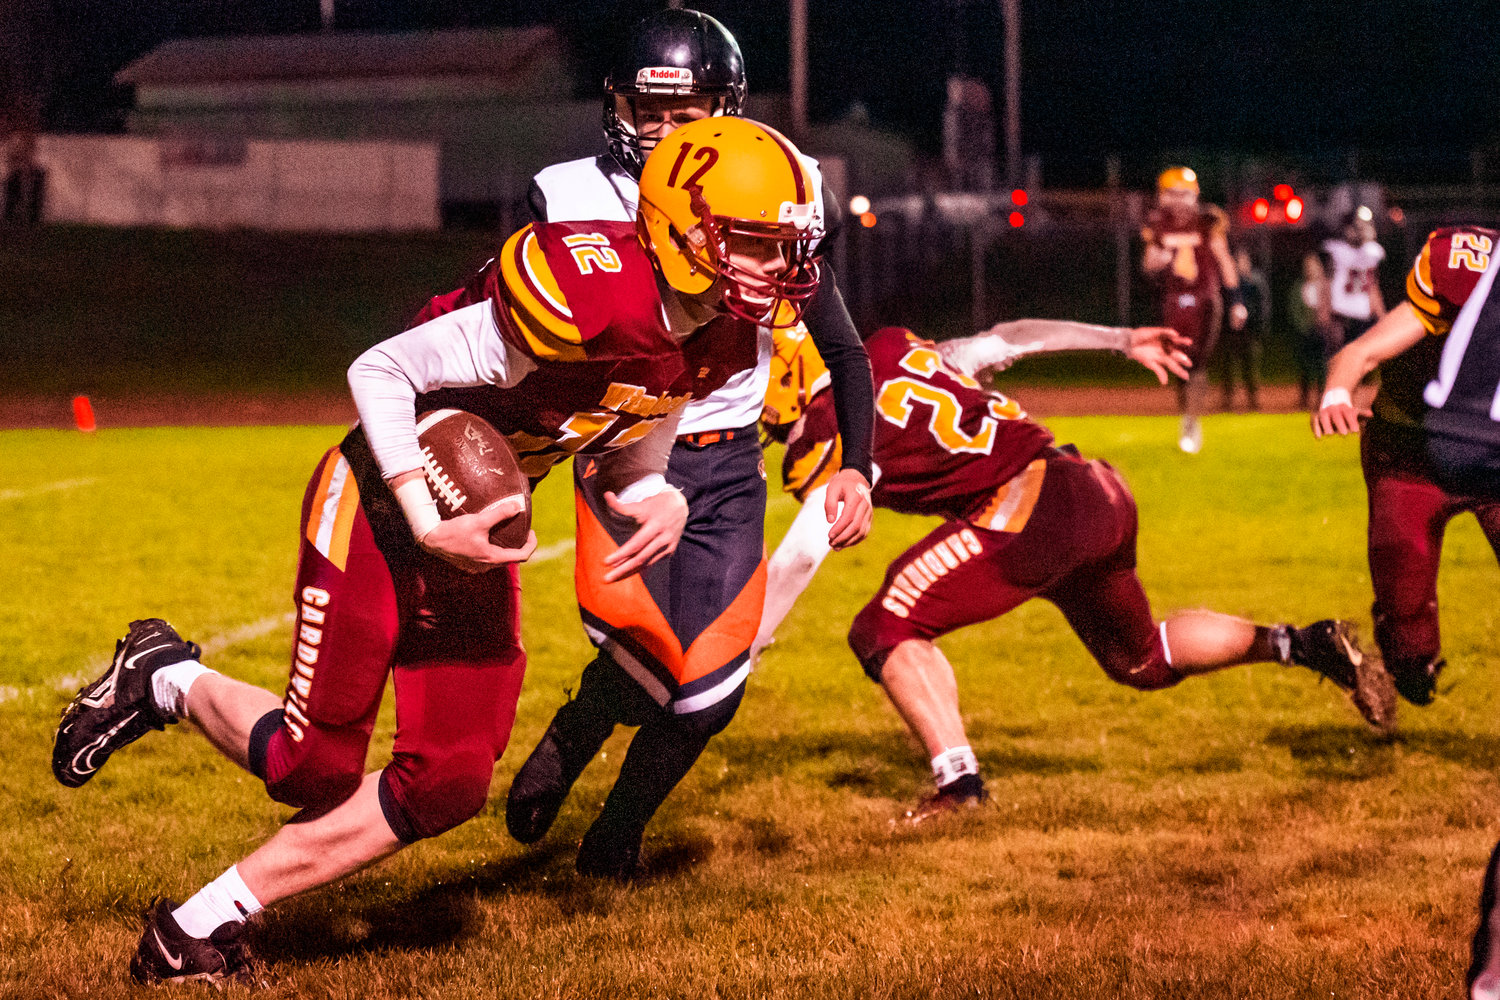 Winlock’s Chase Scofield (12) scoops a fumble forced by Senior Neal Patching (23) Friday night.